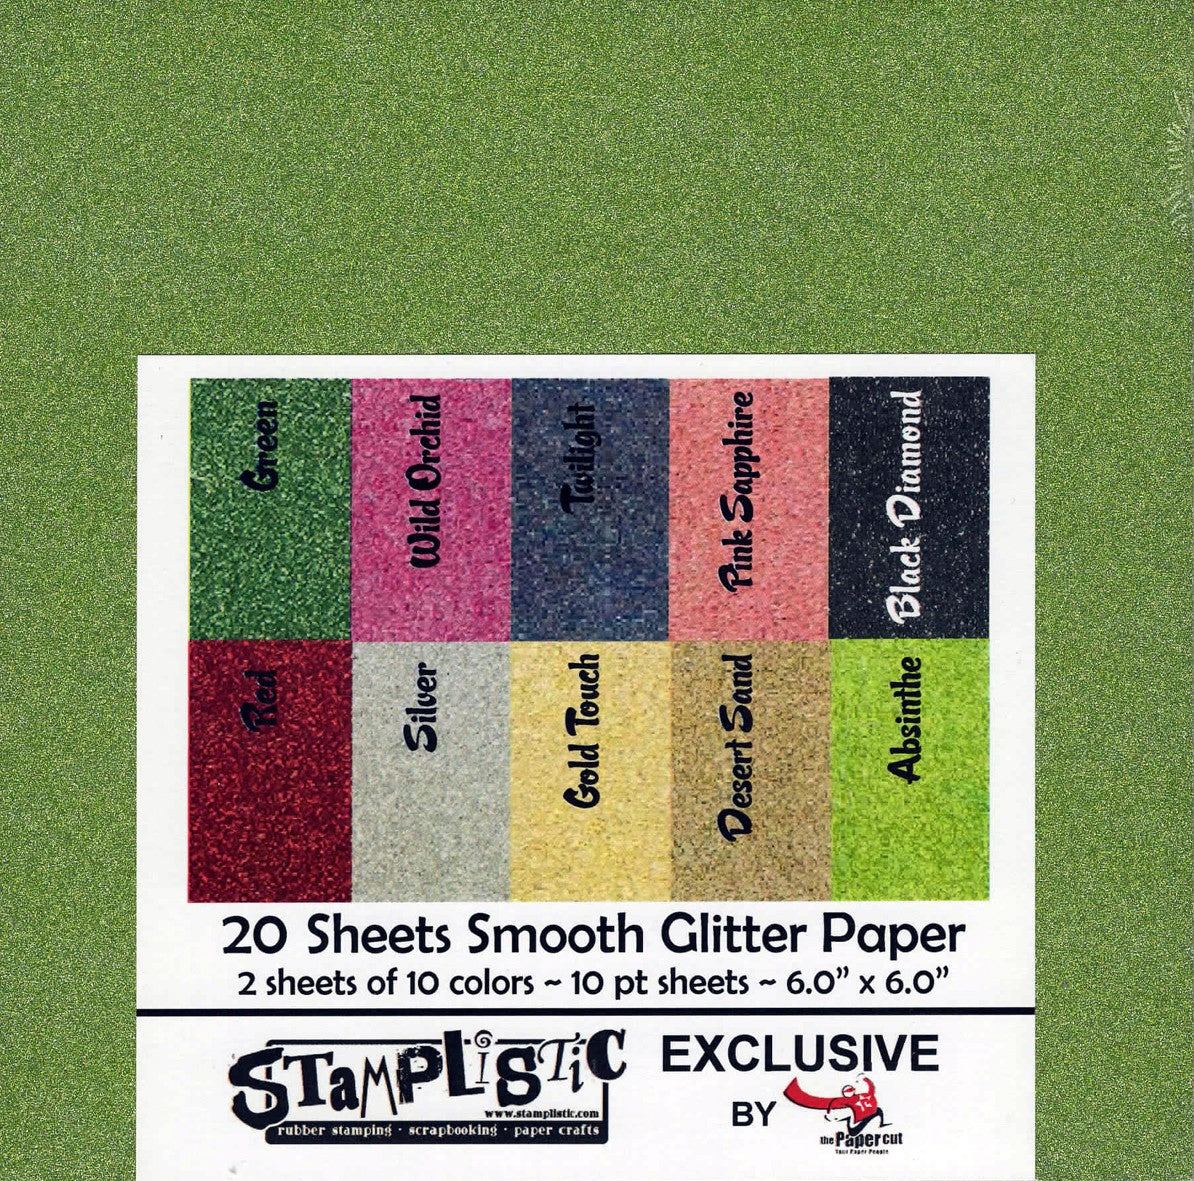 Hunkydory Diamond Sparkles A4 Shimmer Card Rose Pink | 10 Sheets